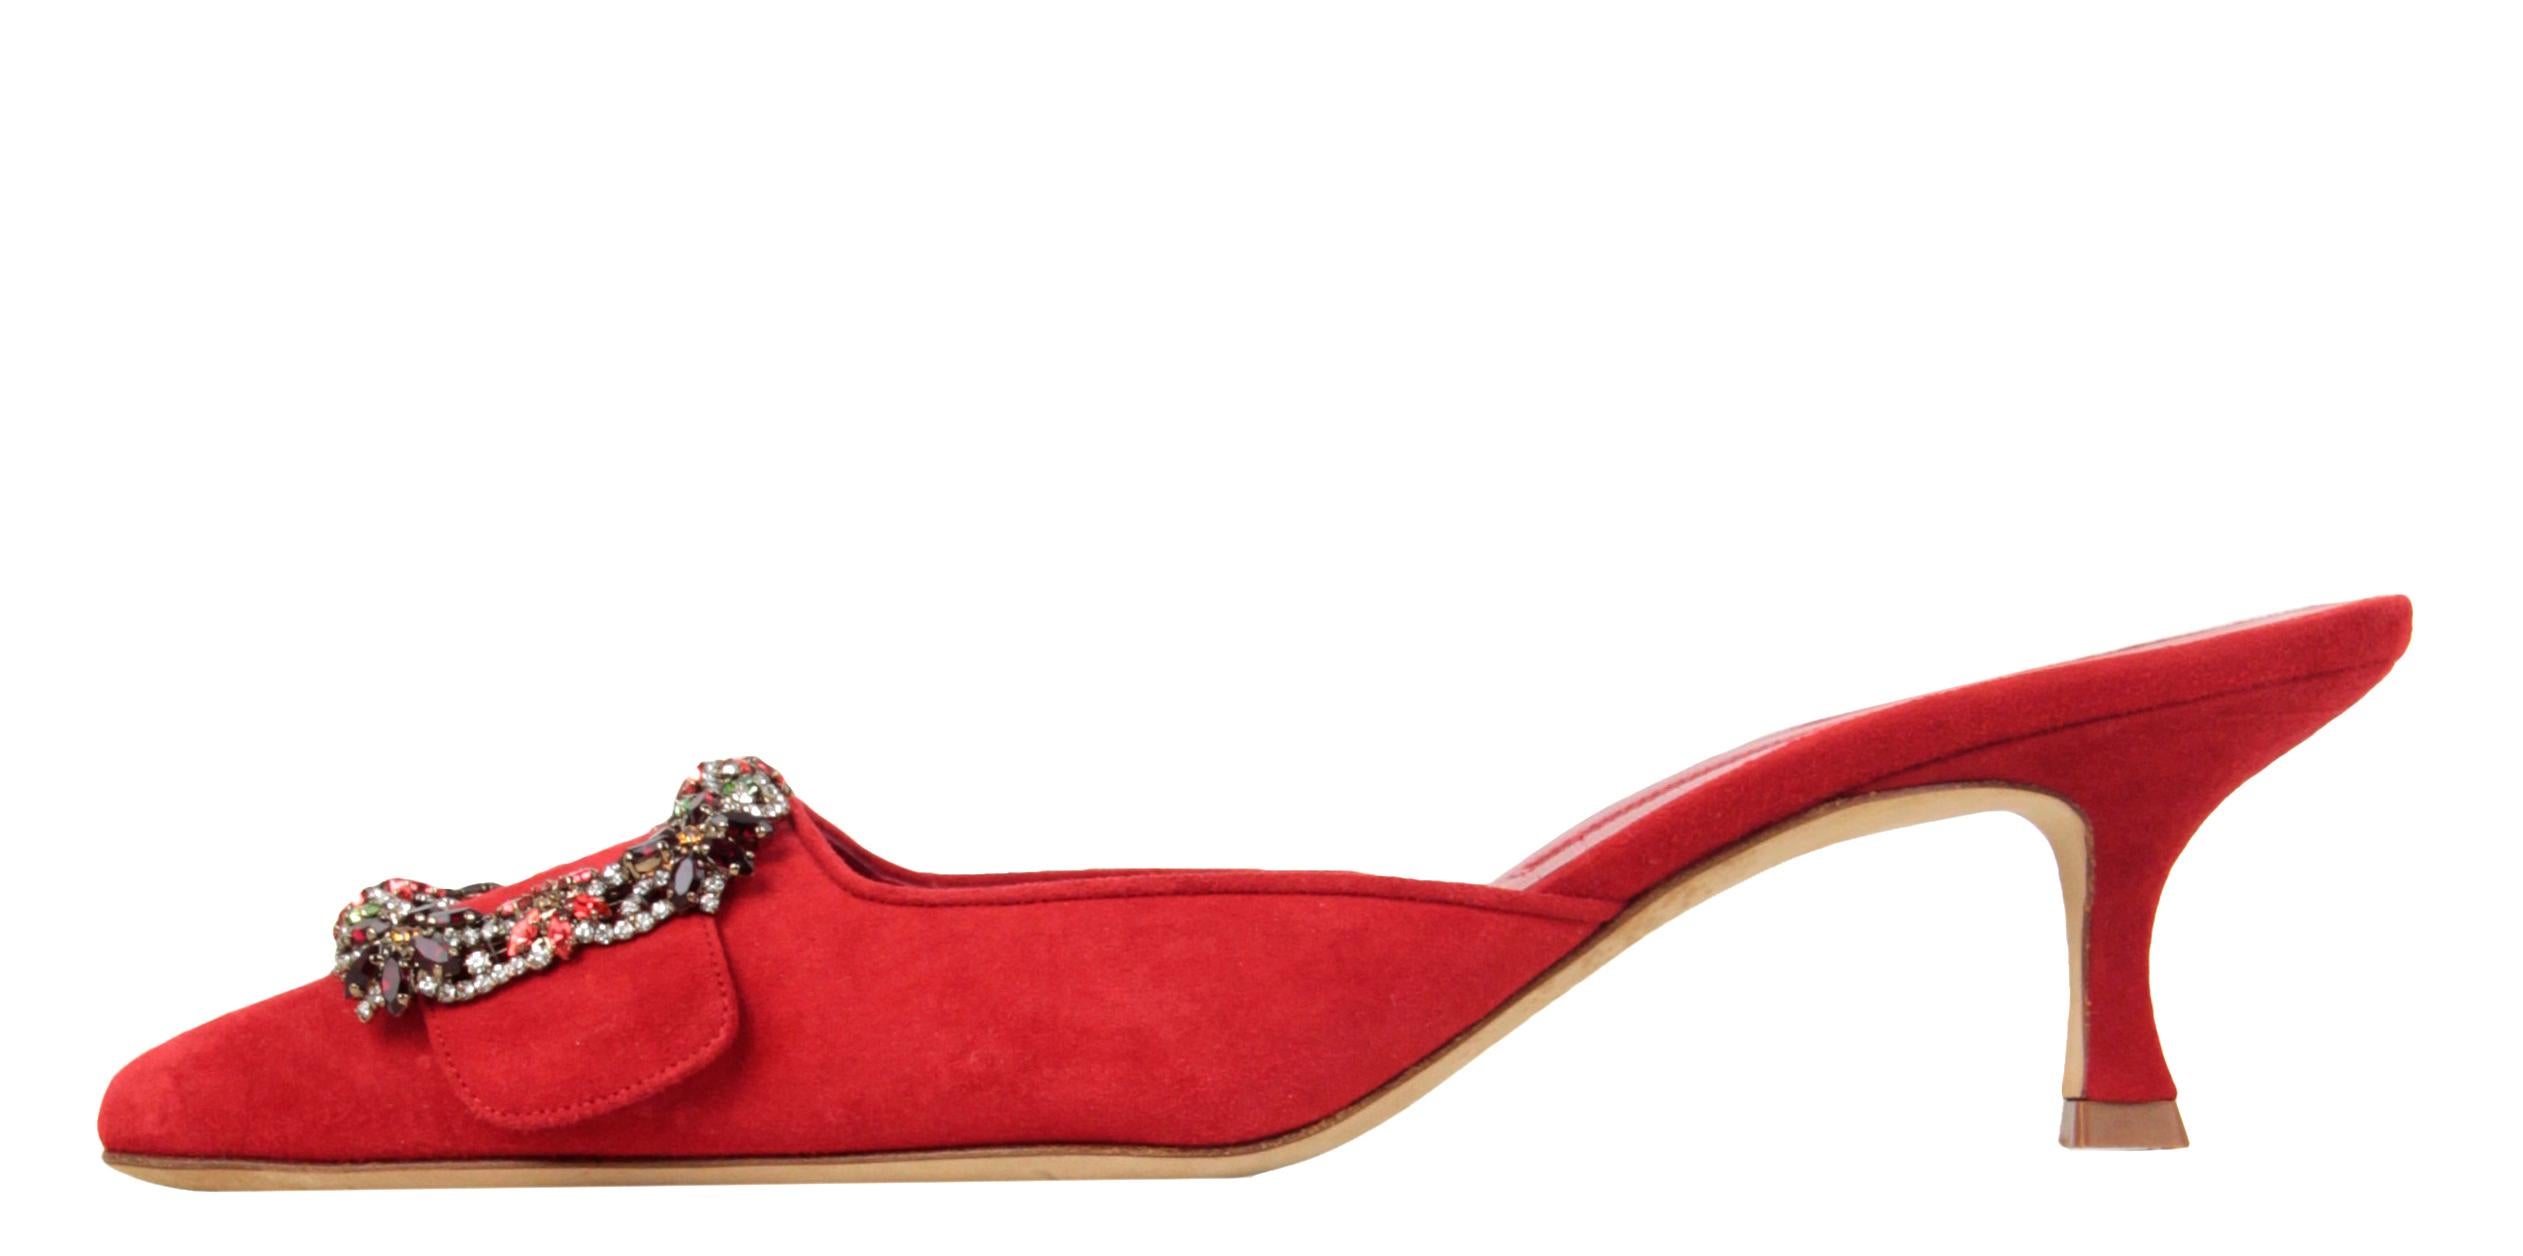 Manolo Blahnik NEW Red Suede Maysale Crystal Buckle Mules sz 39.5

Made In: Italy
Color: Red
Materials: Suede with red, coral, green, amber crystals
Closure/Opening: Slip on
Overall Condition: Like new. Does not include box or dustbags
Estimated